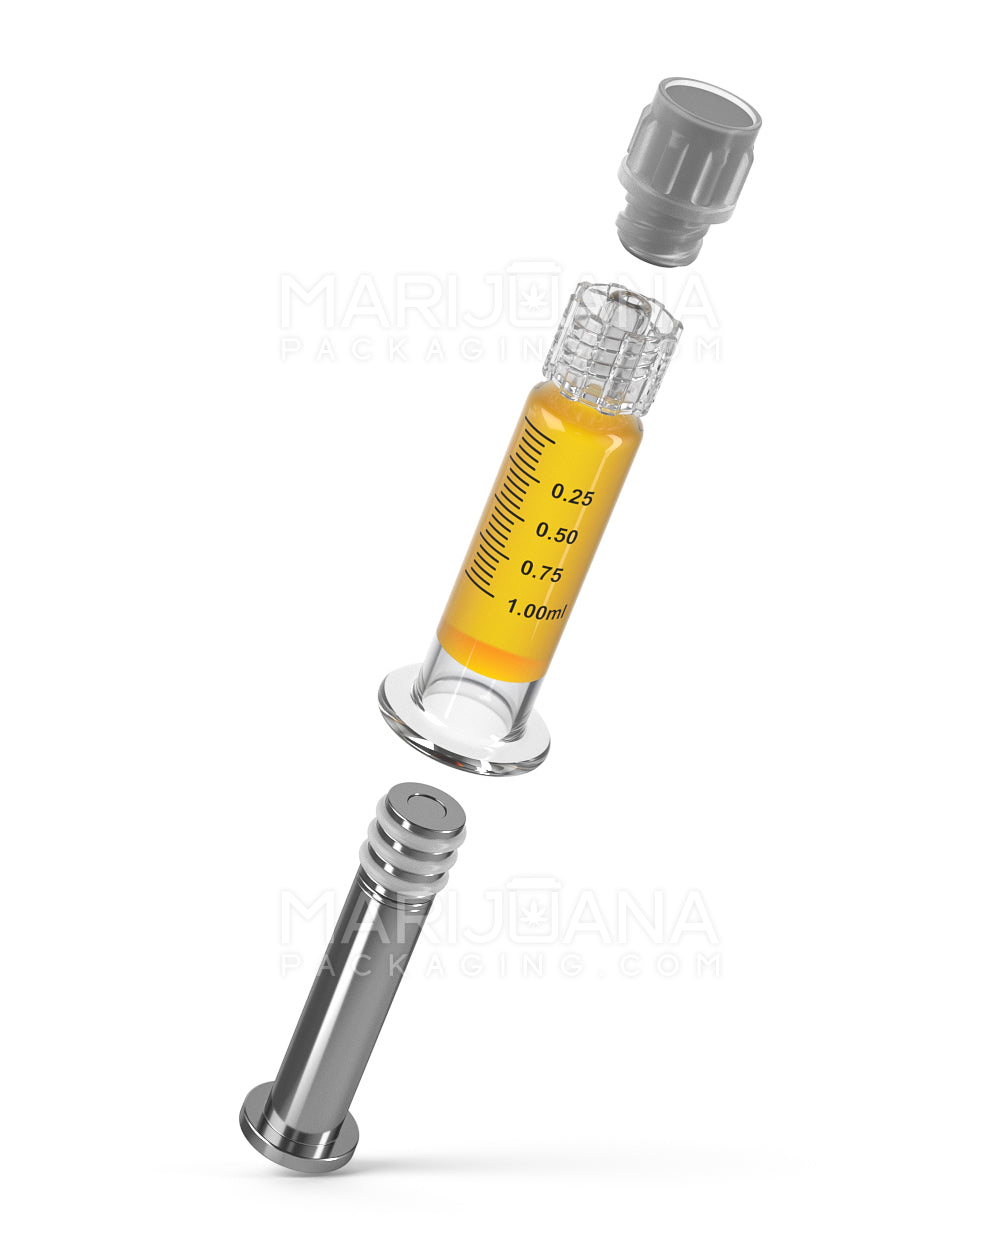 Luer Lock | Glass Dab Applicator Syringes w/ Metal Plunger | 1mL - 0.25mL Increments - 100 Count - 7